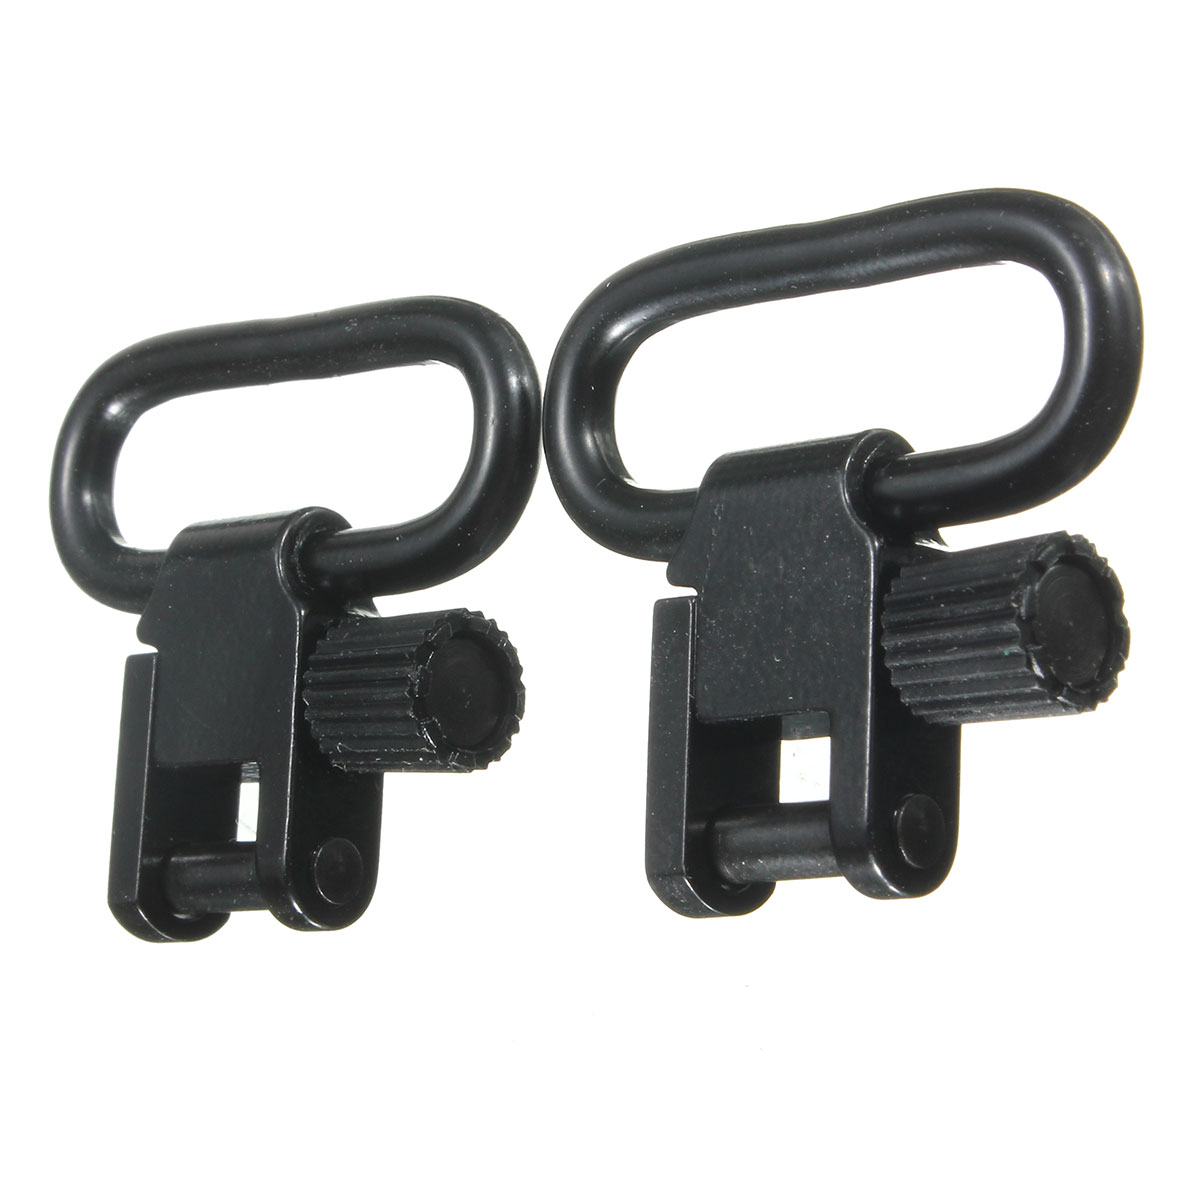 2Pcs-1-Inch-Quick-Detach-Sling-Mounting-Wood-Swivels-Adapter-For-Screw-Hunting-Tool-1191654